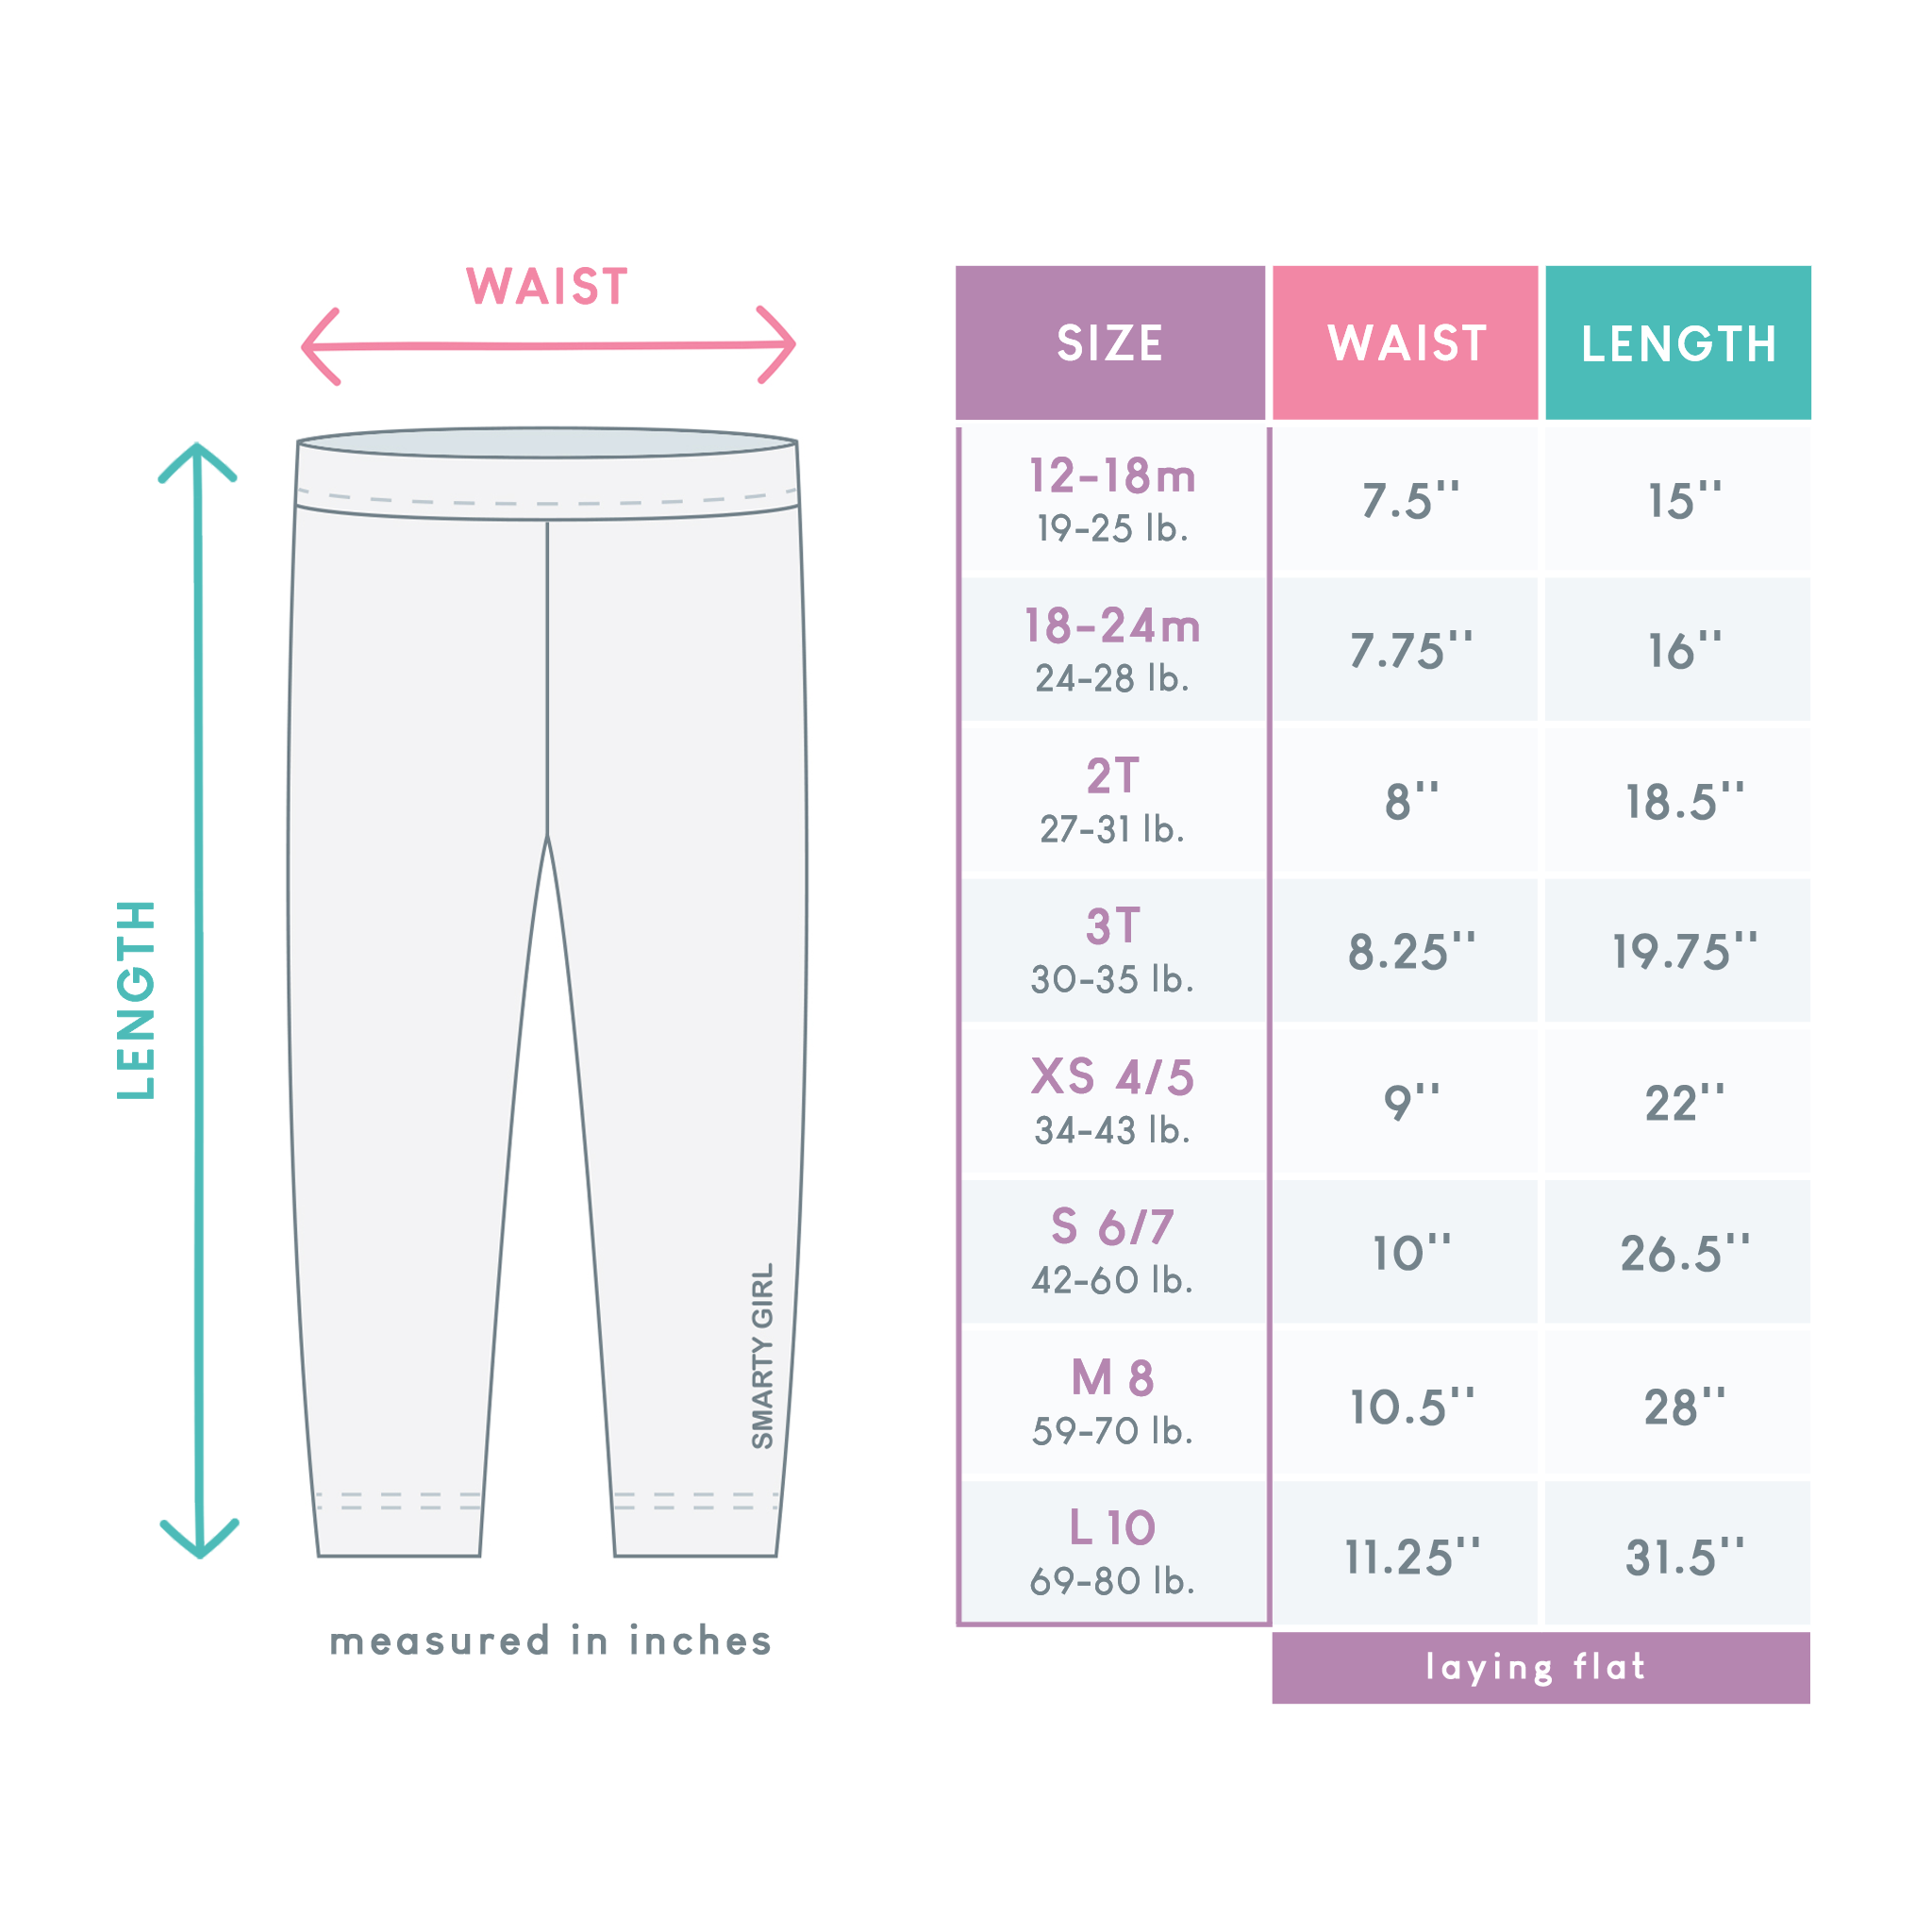 Smarty Girl Size Chart  Leggings that Empower Girls to Explore STEM –  Smarty Girl & Co.